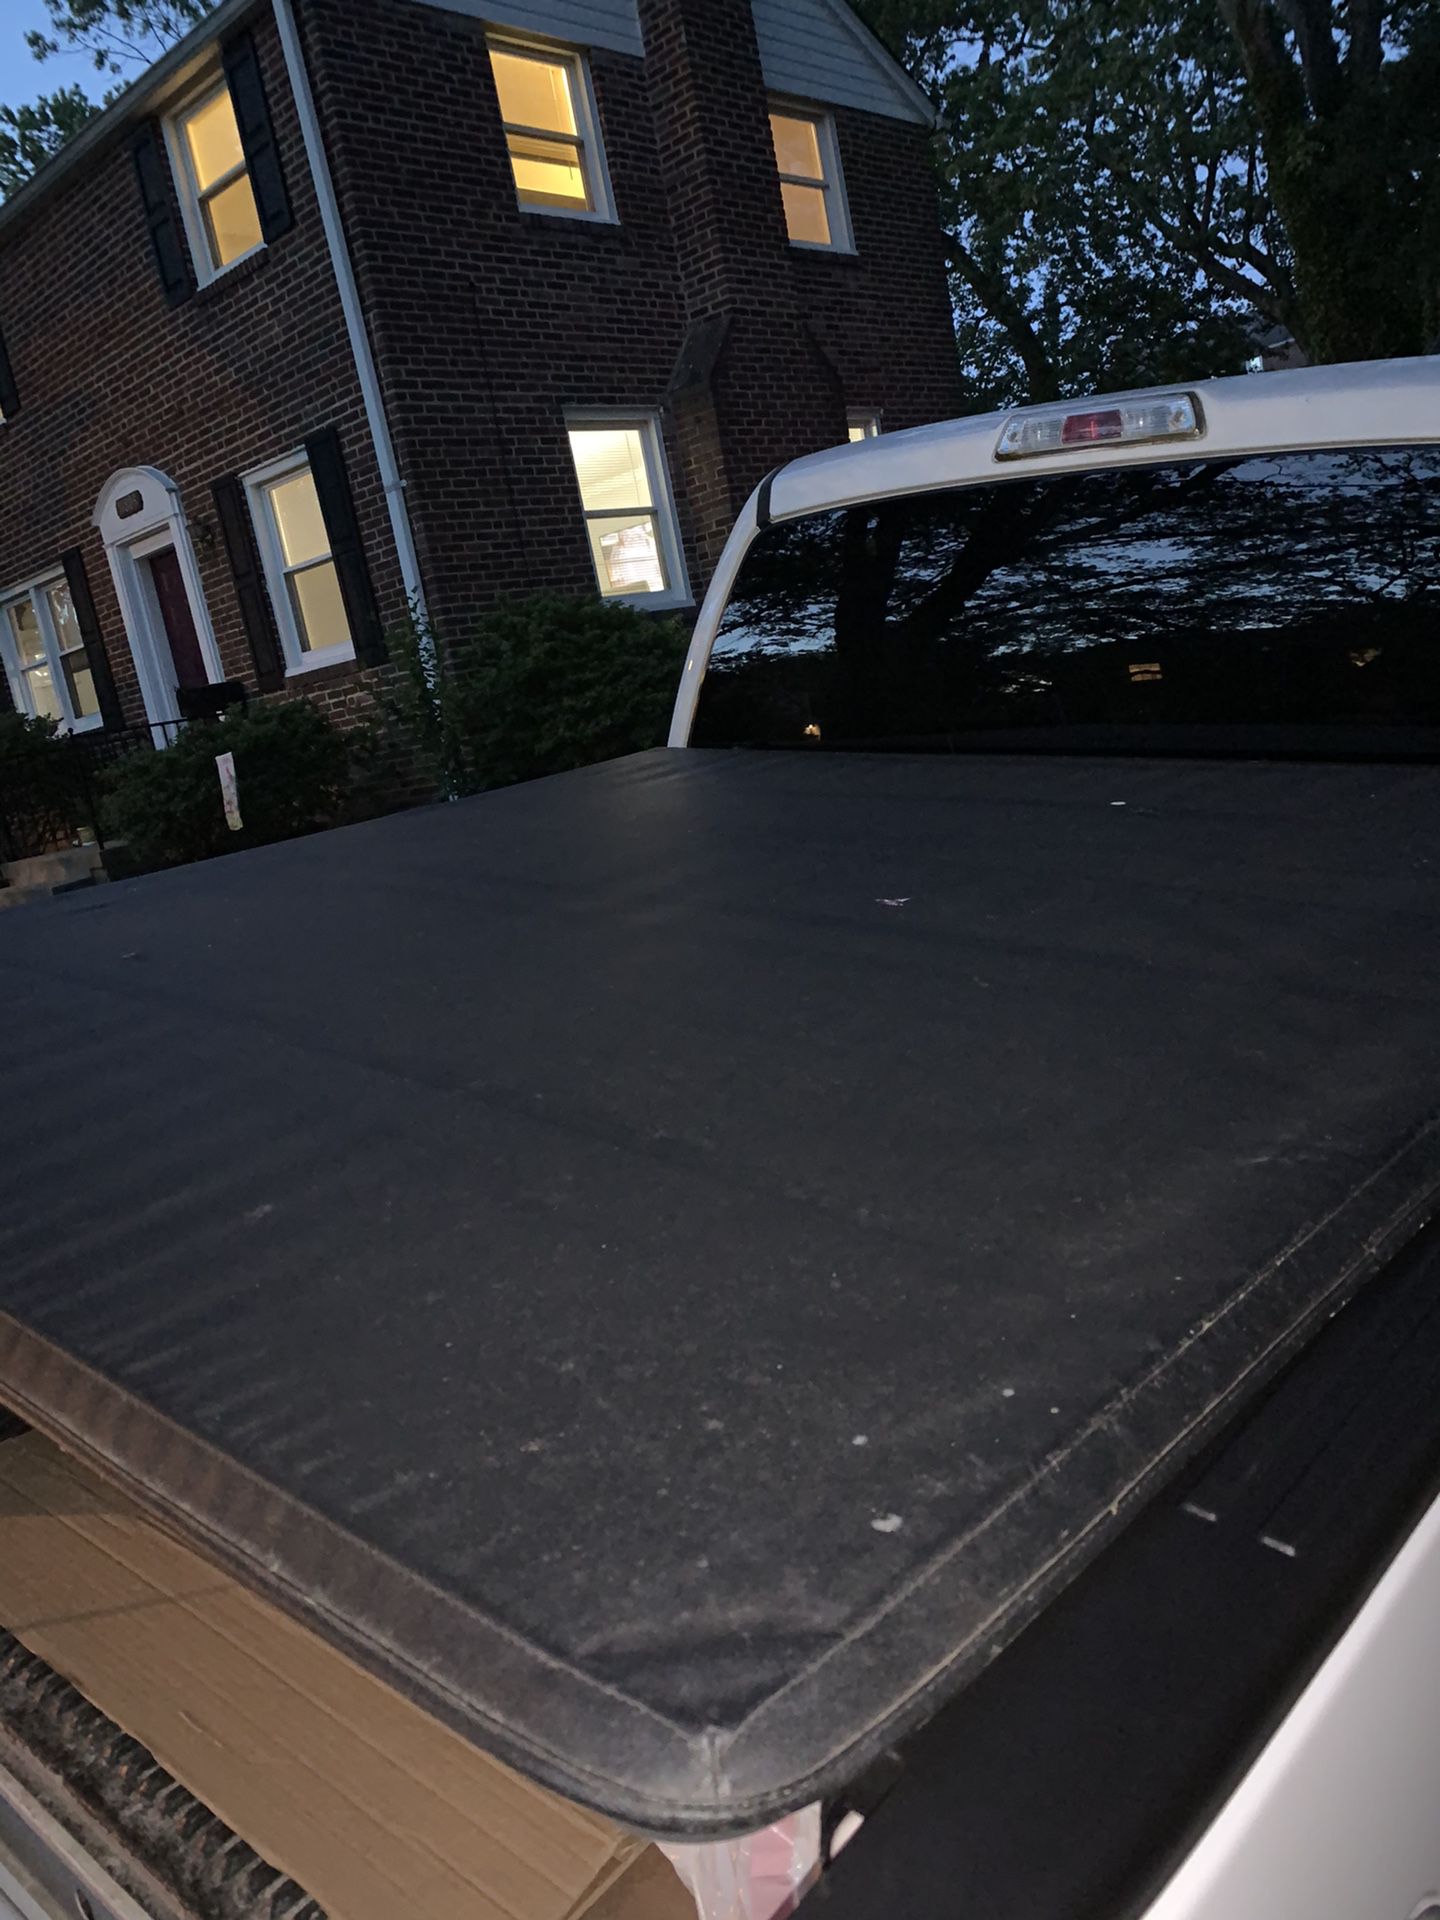 bed cover truck F150